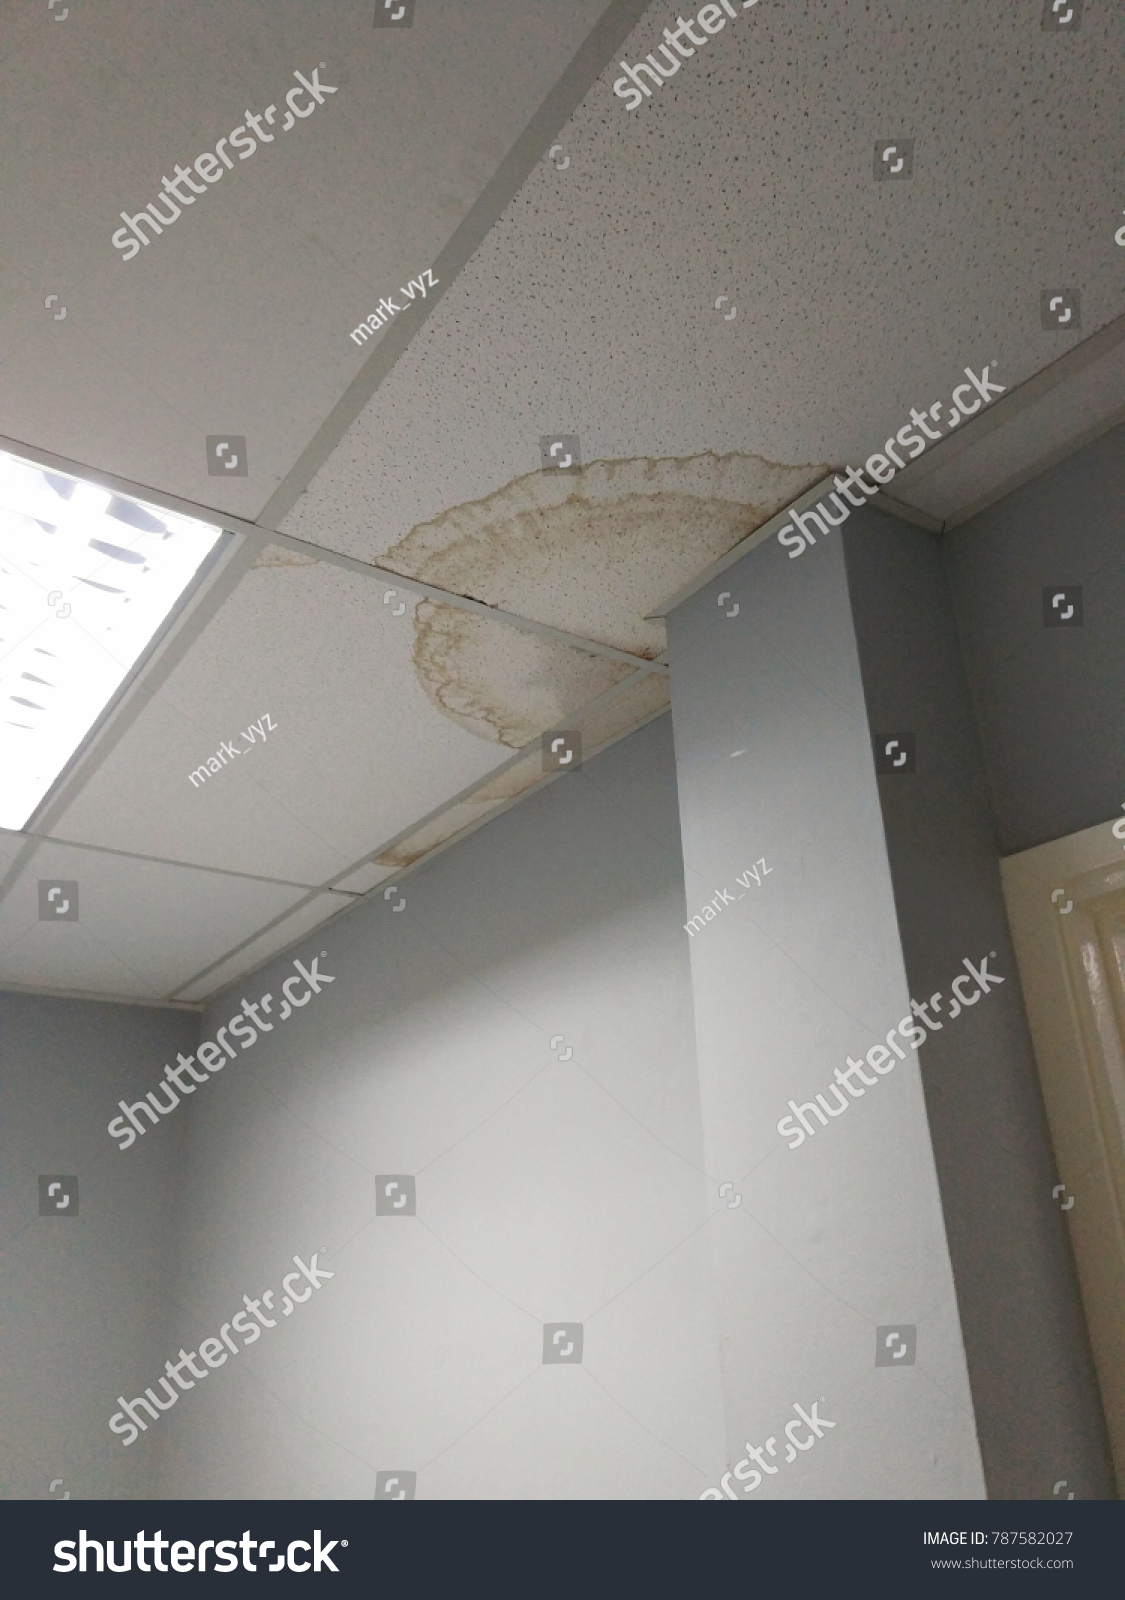 Dangerous Toxic Fungus Mold On Ceiling Royalty Free Stock